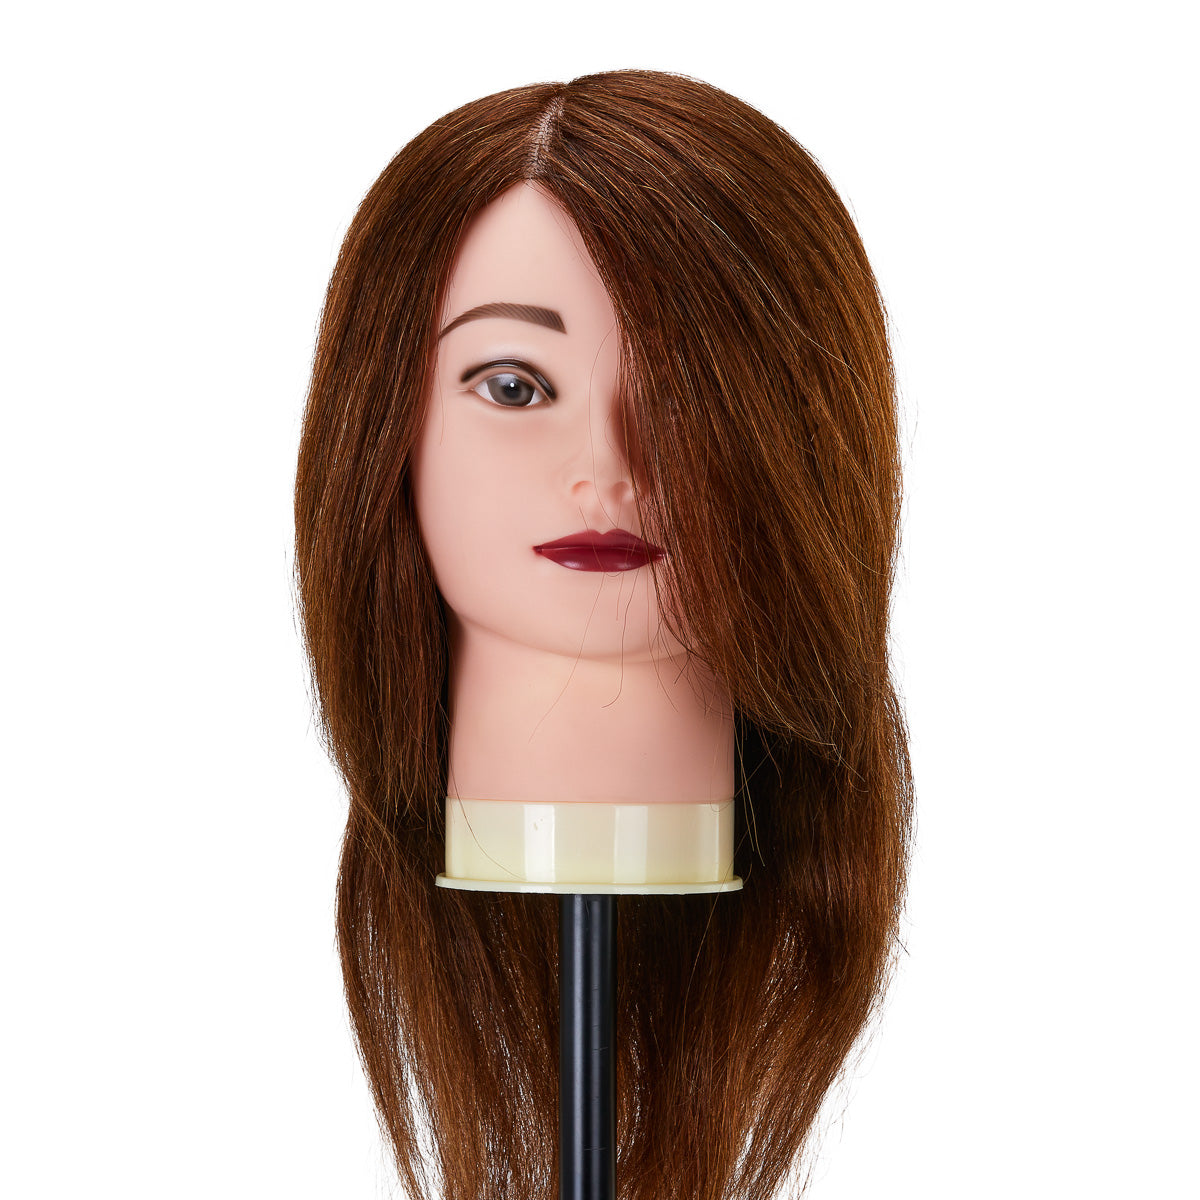 Gabbiano WZ1 Hairdressing Training Head with Real Hair, Color 4#, Length 16" 